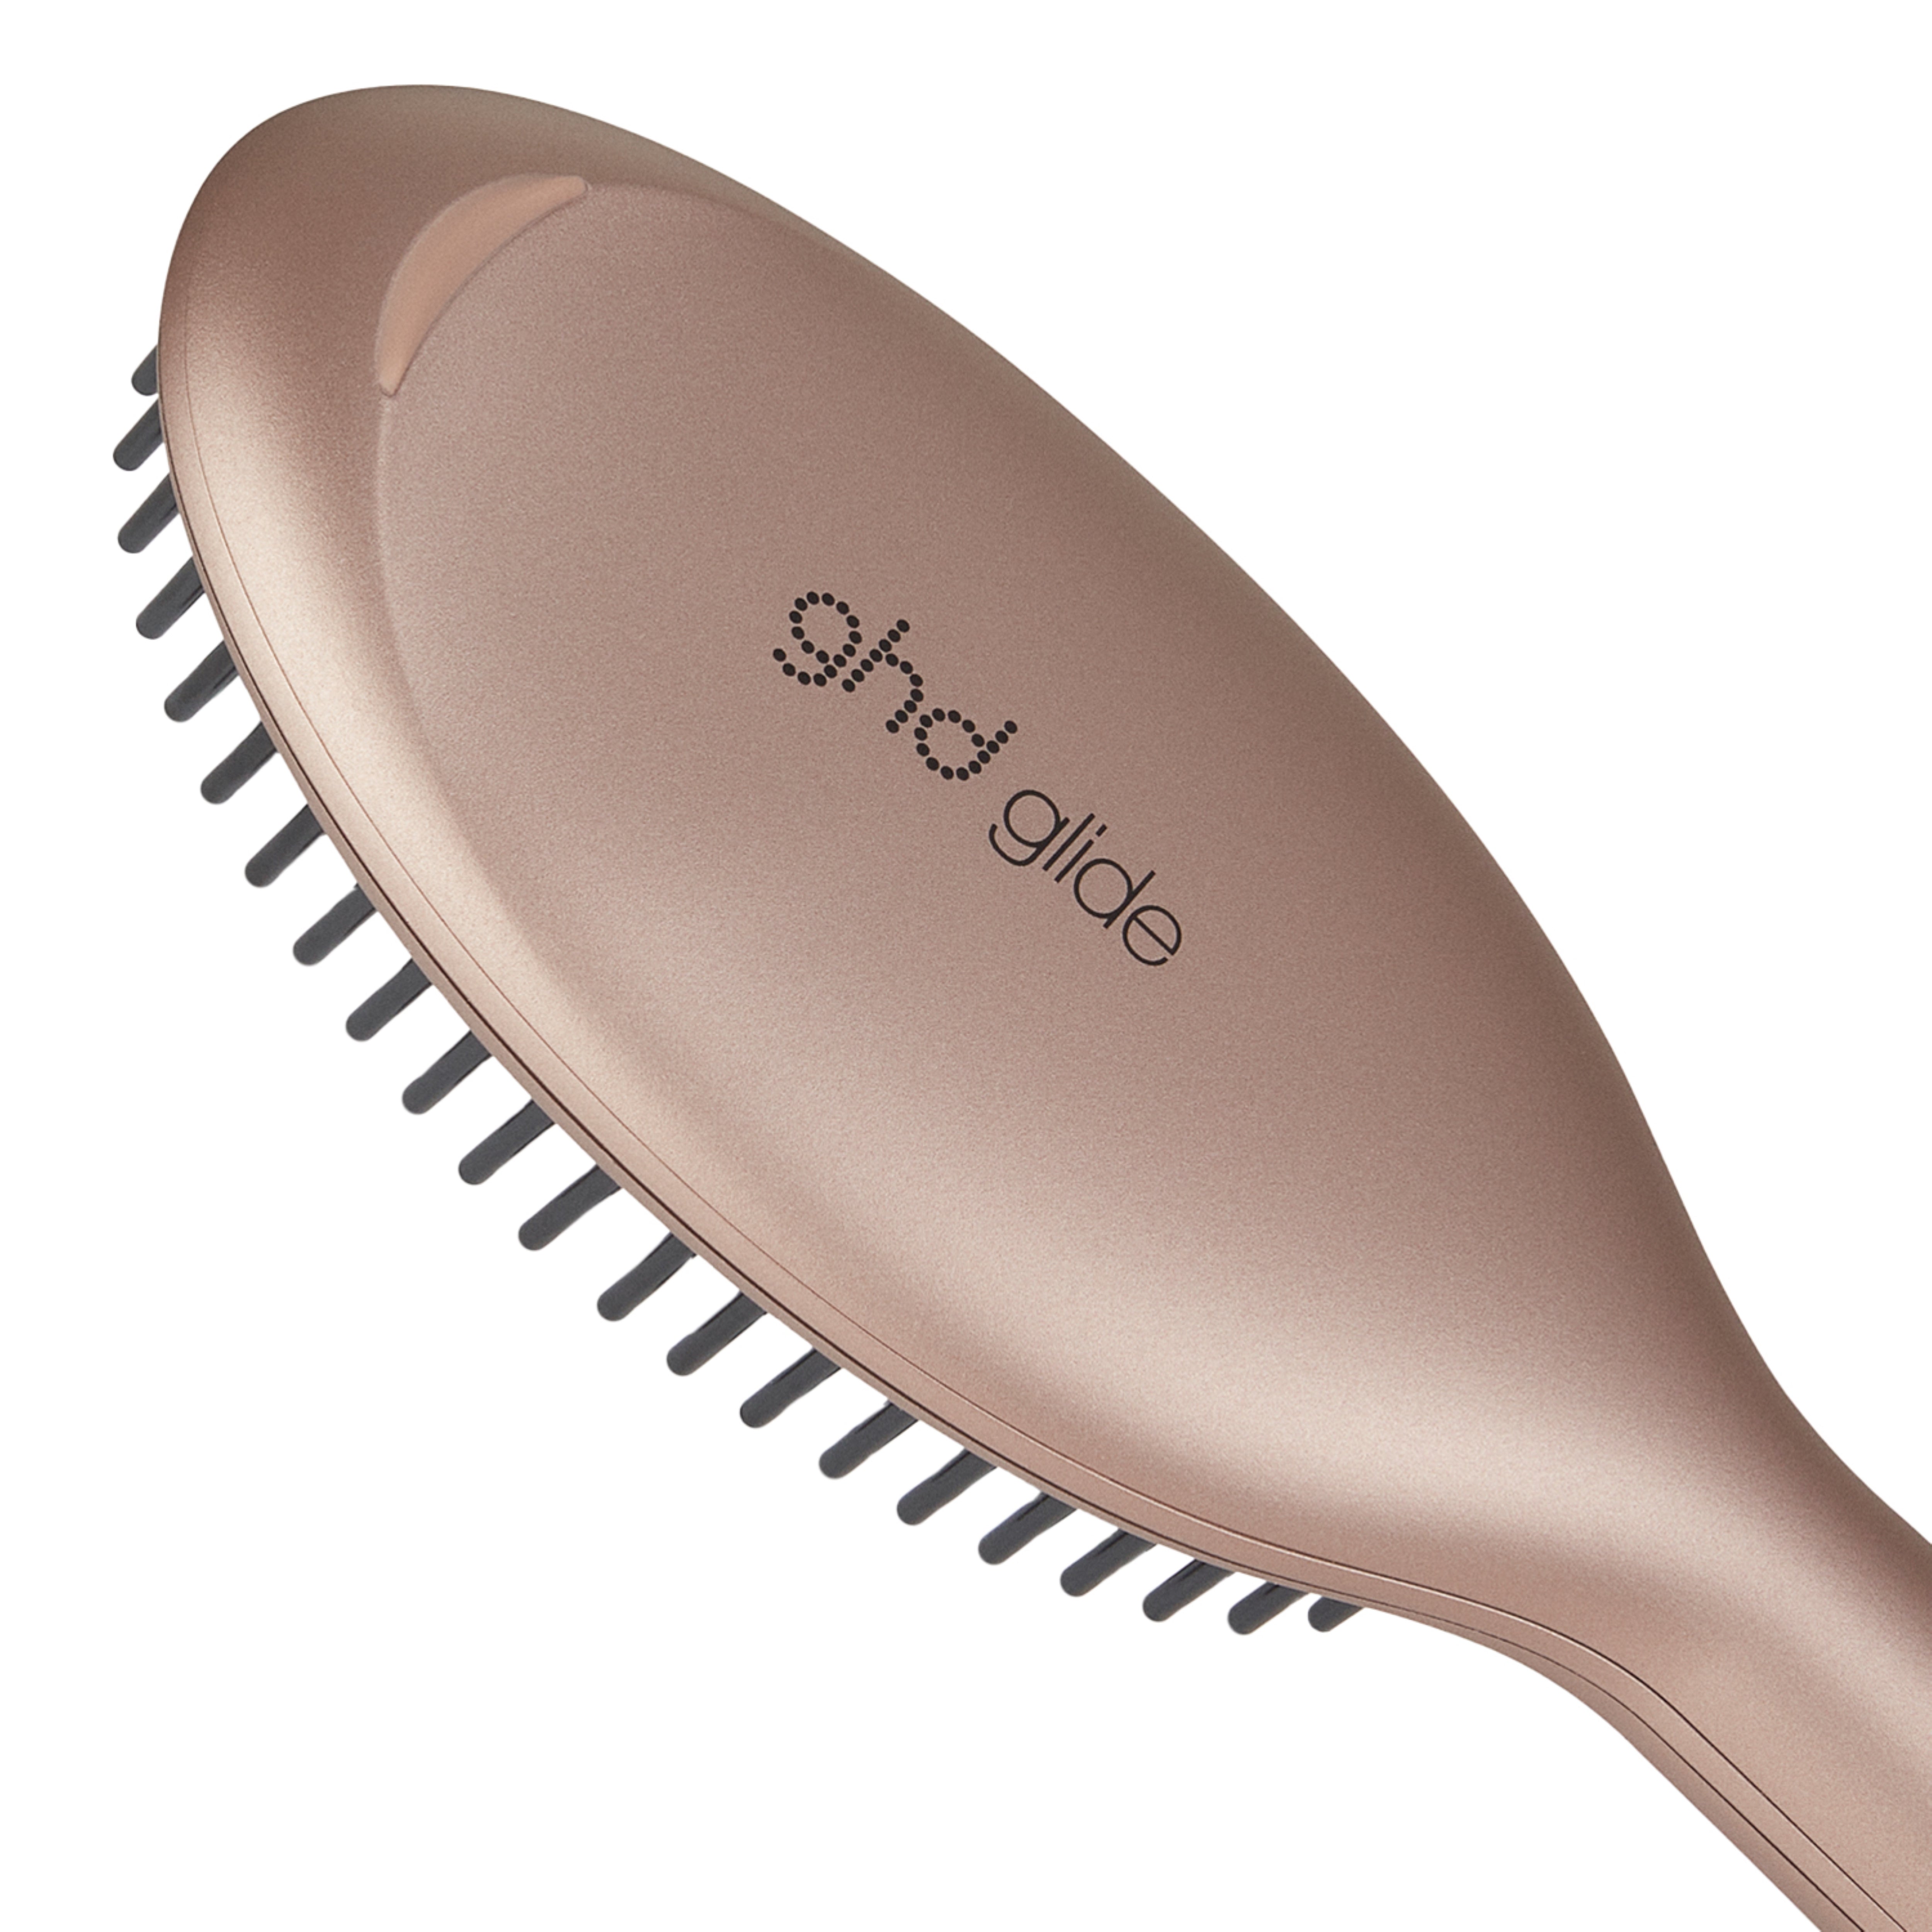 Picture of Sunsthetic Glide Smoothing Hot Brush in Sun-Kissed Bronze